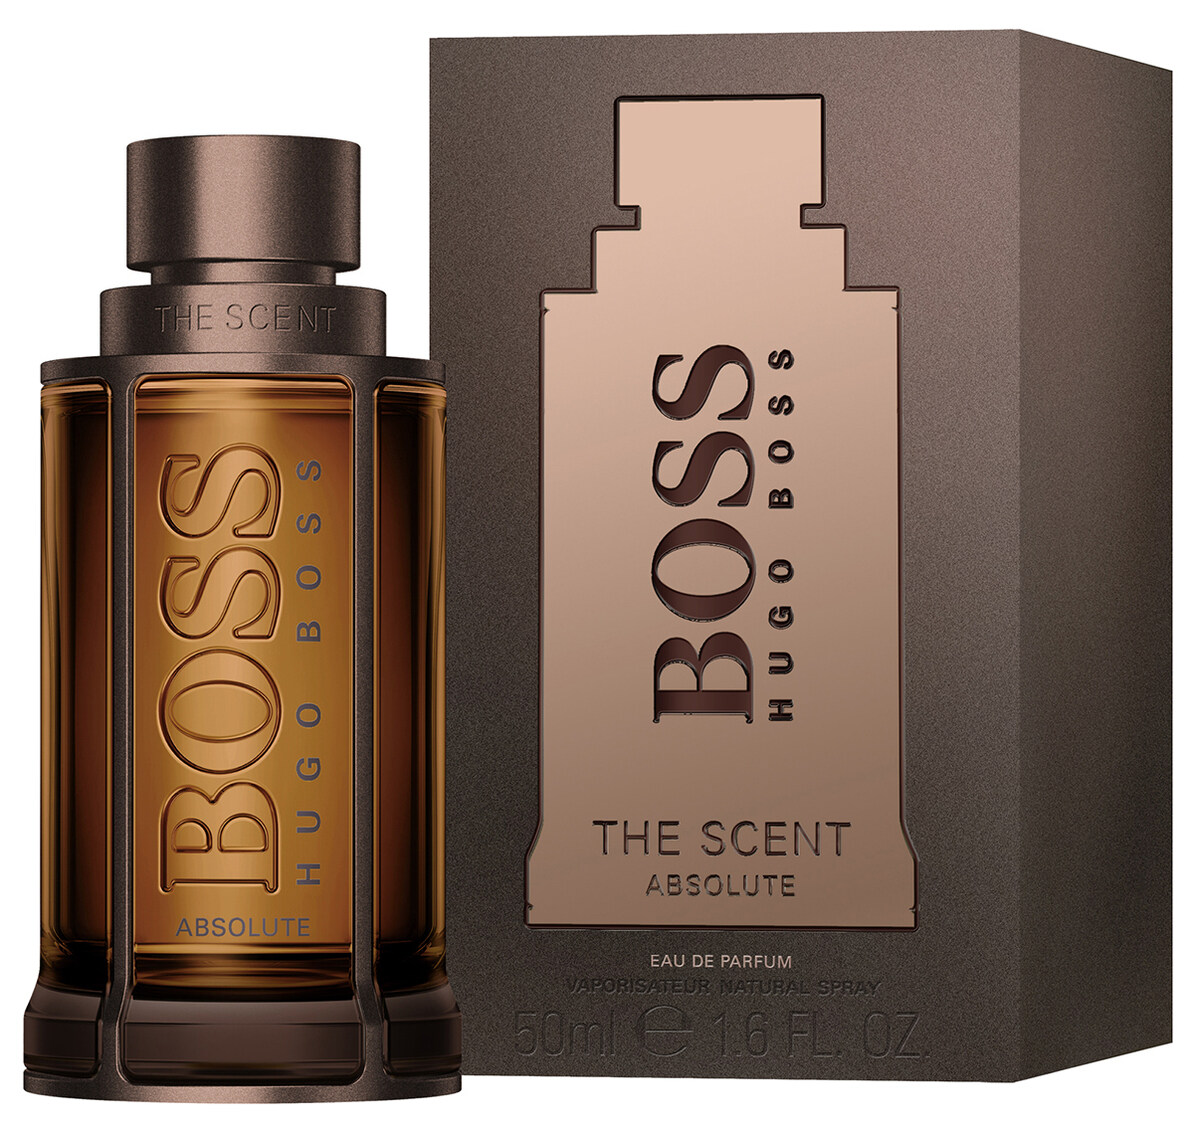 The Scent Absolute for Him by Hugo Boss » Reviews & Perfume Facts